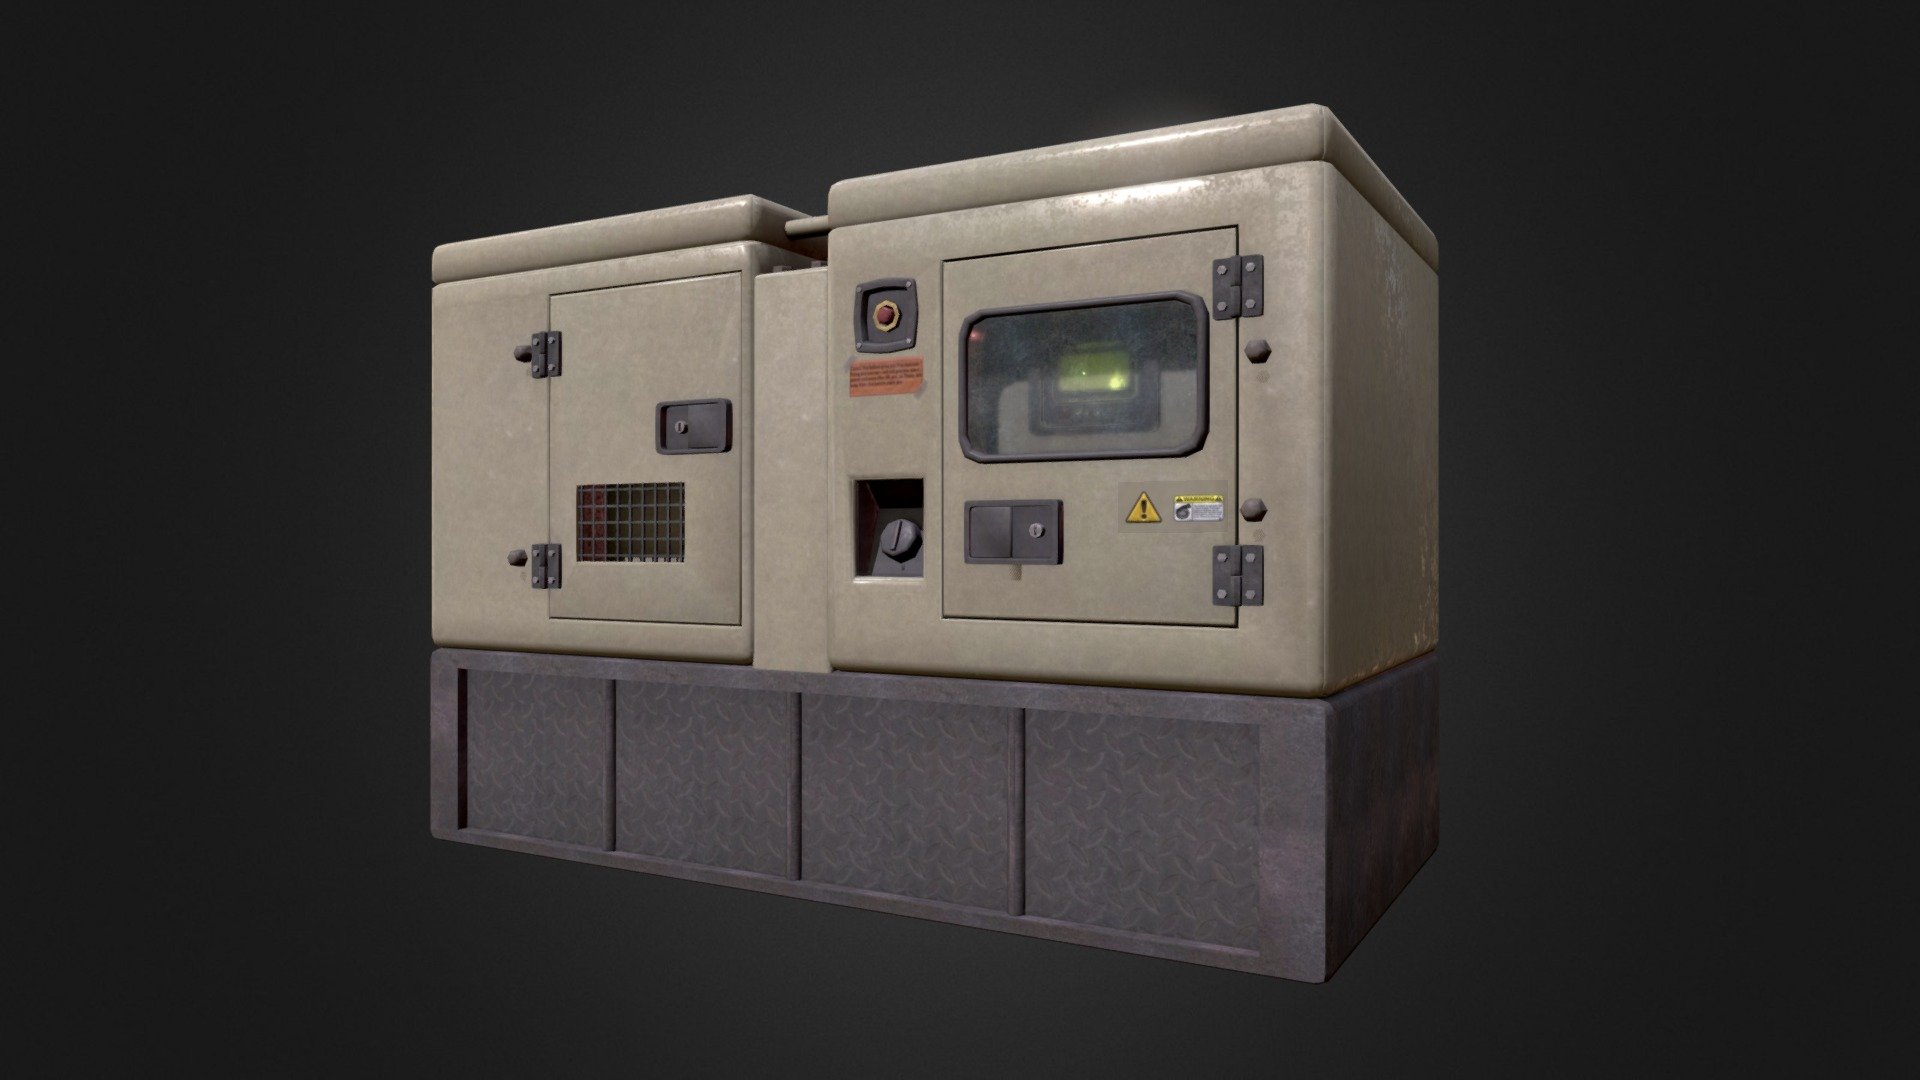 Here is a Generator i created hope you like it :P. I fixed the normals and UV's, now it looks much better 3d model